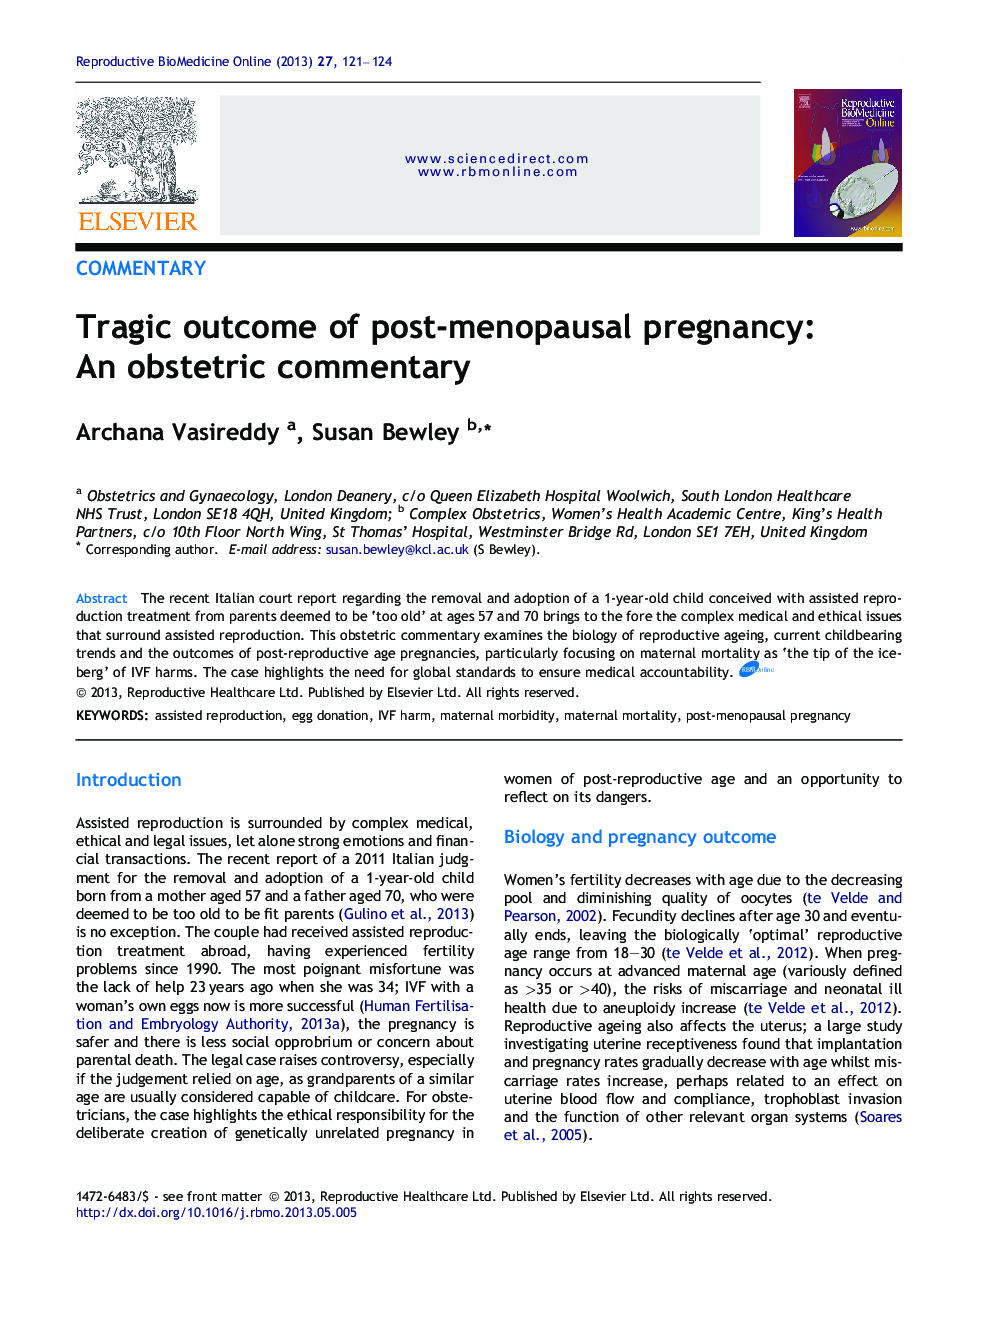 Tragic outcome of post-menopausal pregnancy: An obstetric commentary